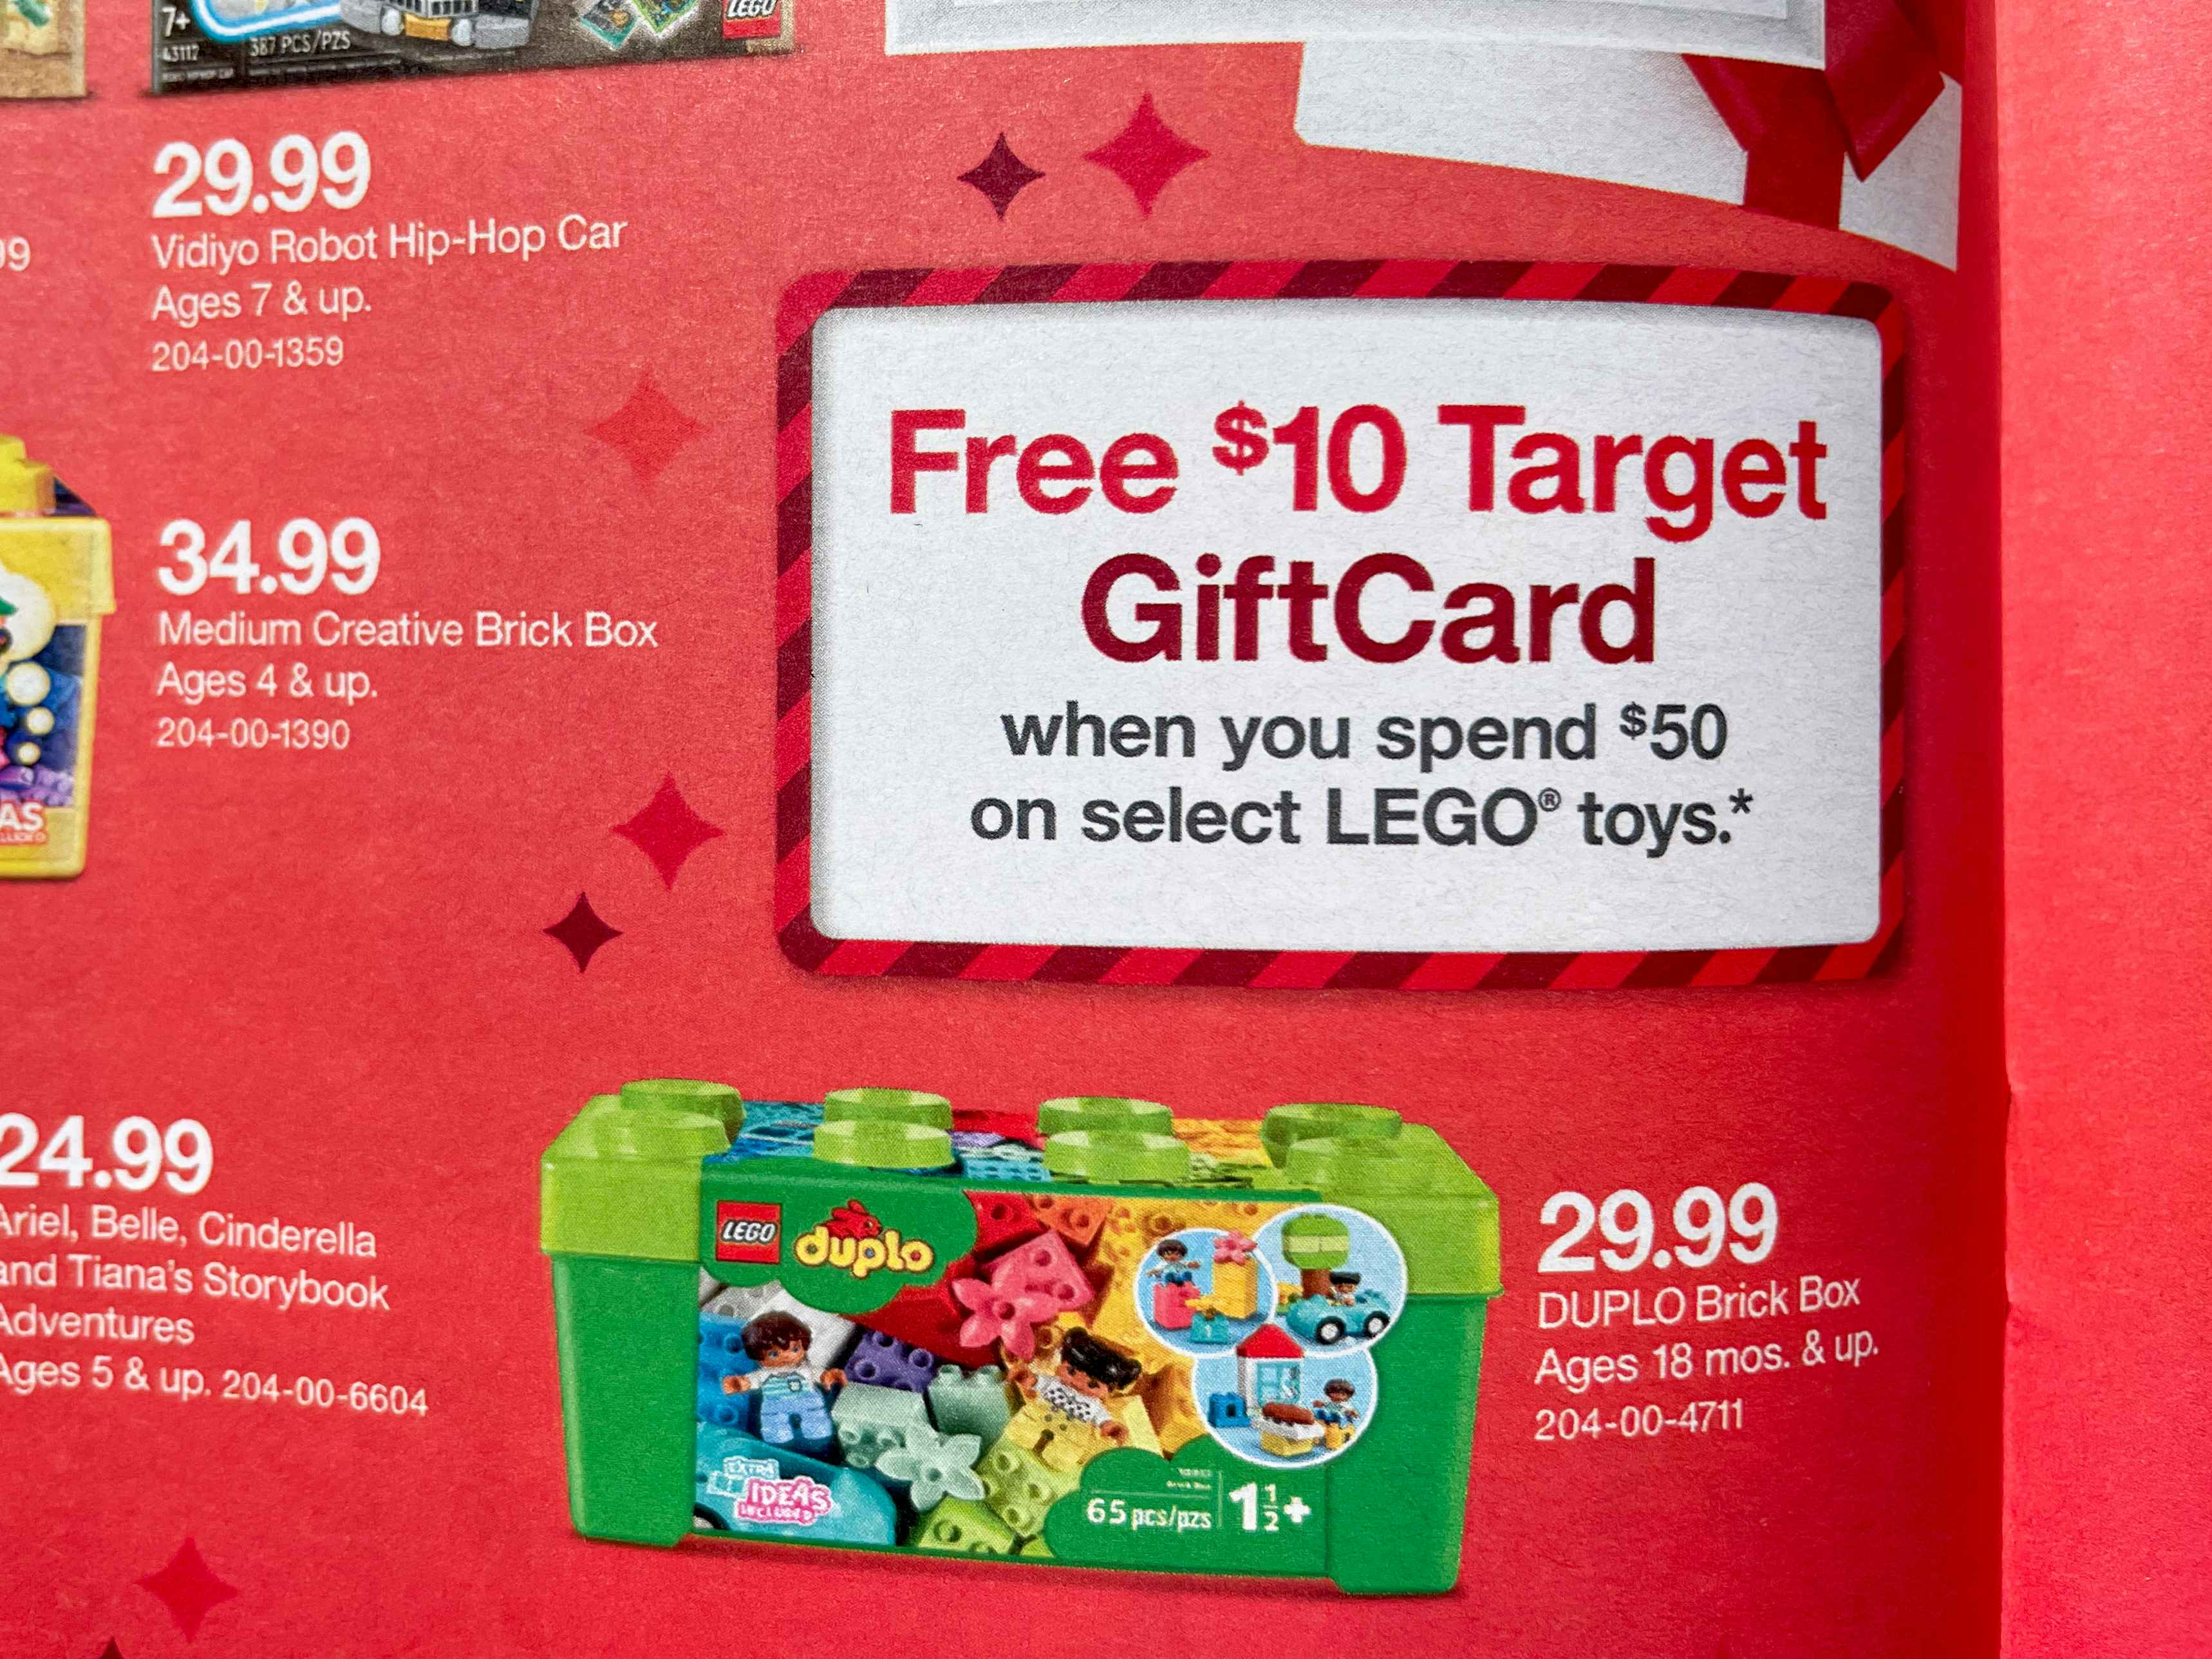 A close up of the free $10 free target gift card offer in the Target Toy Book